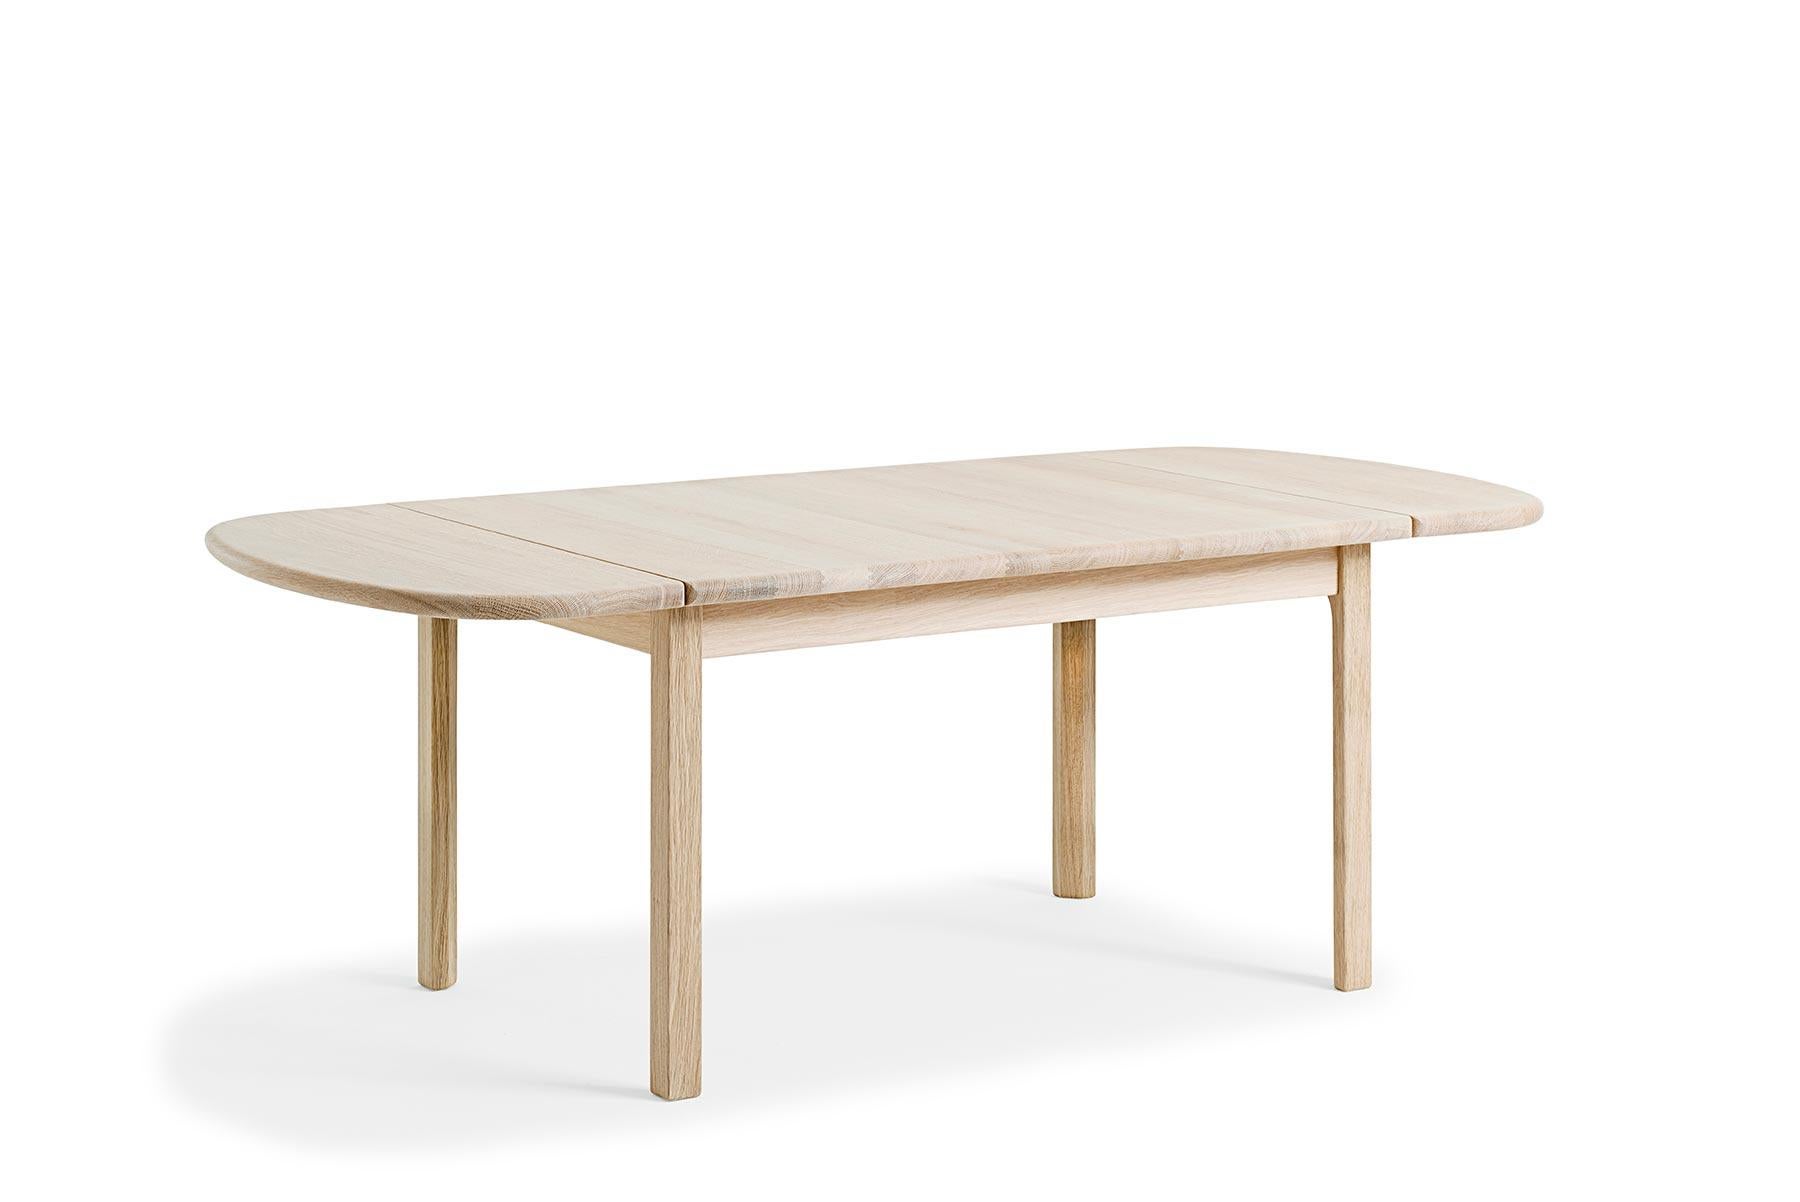 Hans Wegner GE, 82/85 Coffee Table, Lacquered Oak In Excellent Condition For Sale In Berkeley, CA